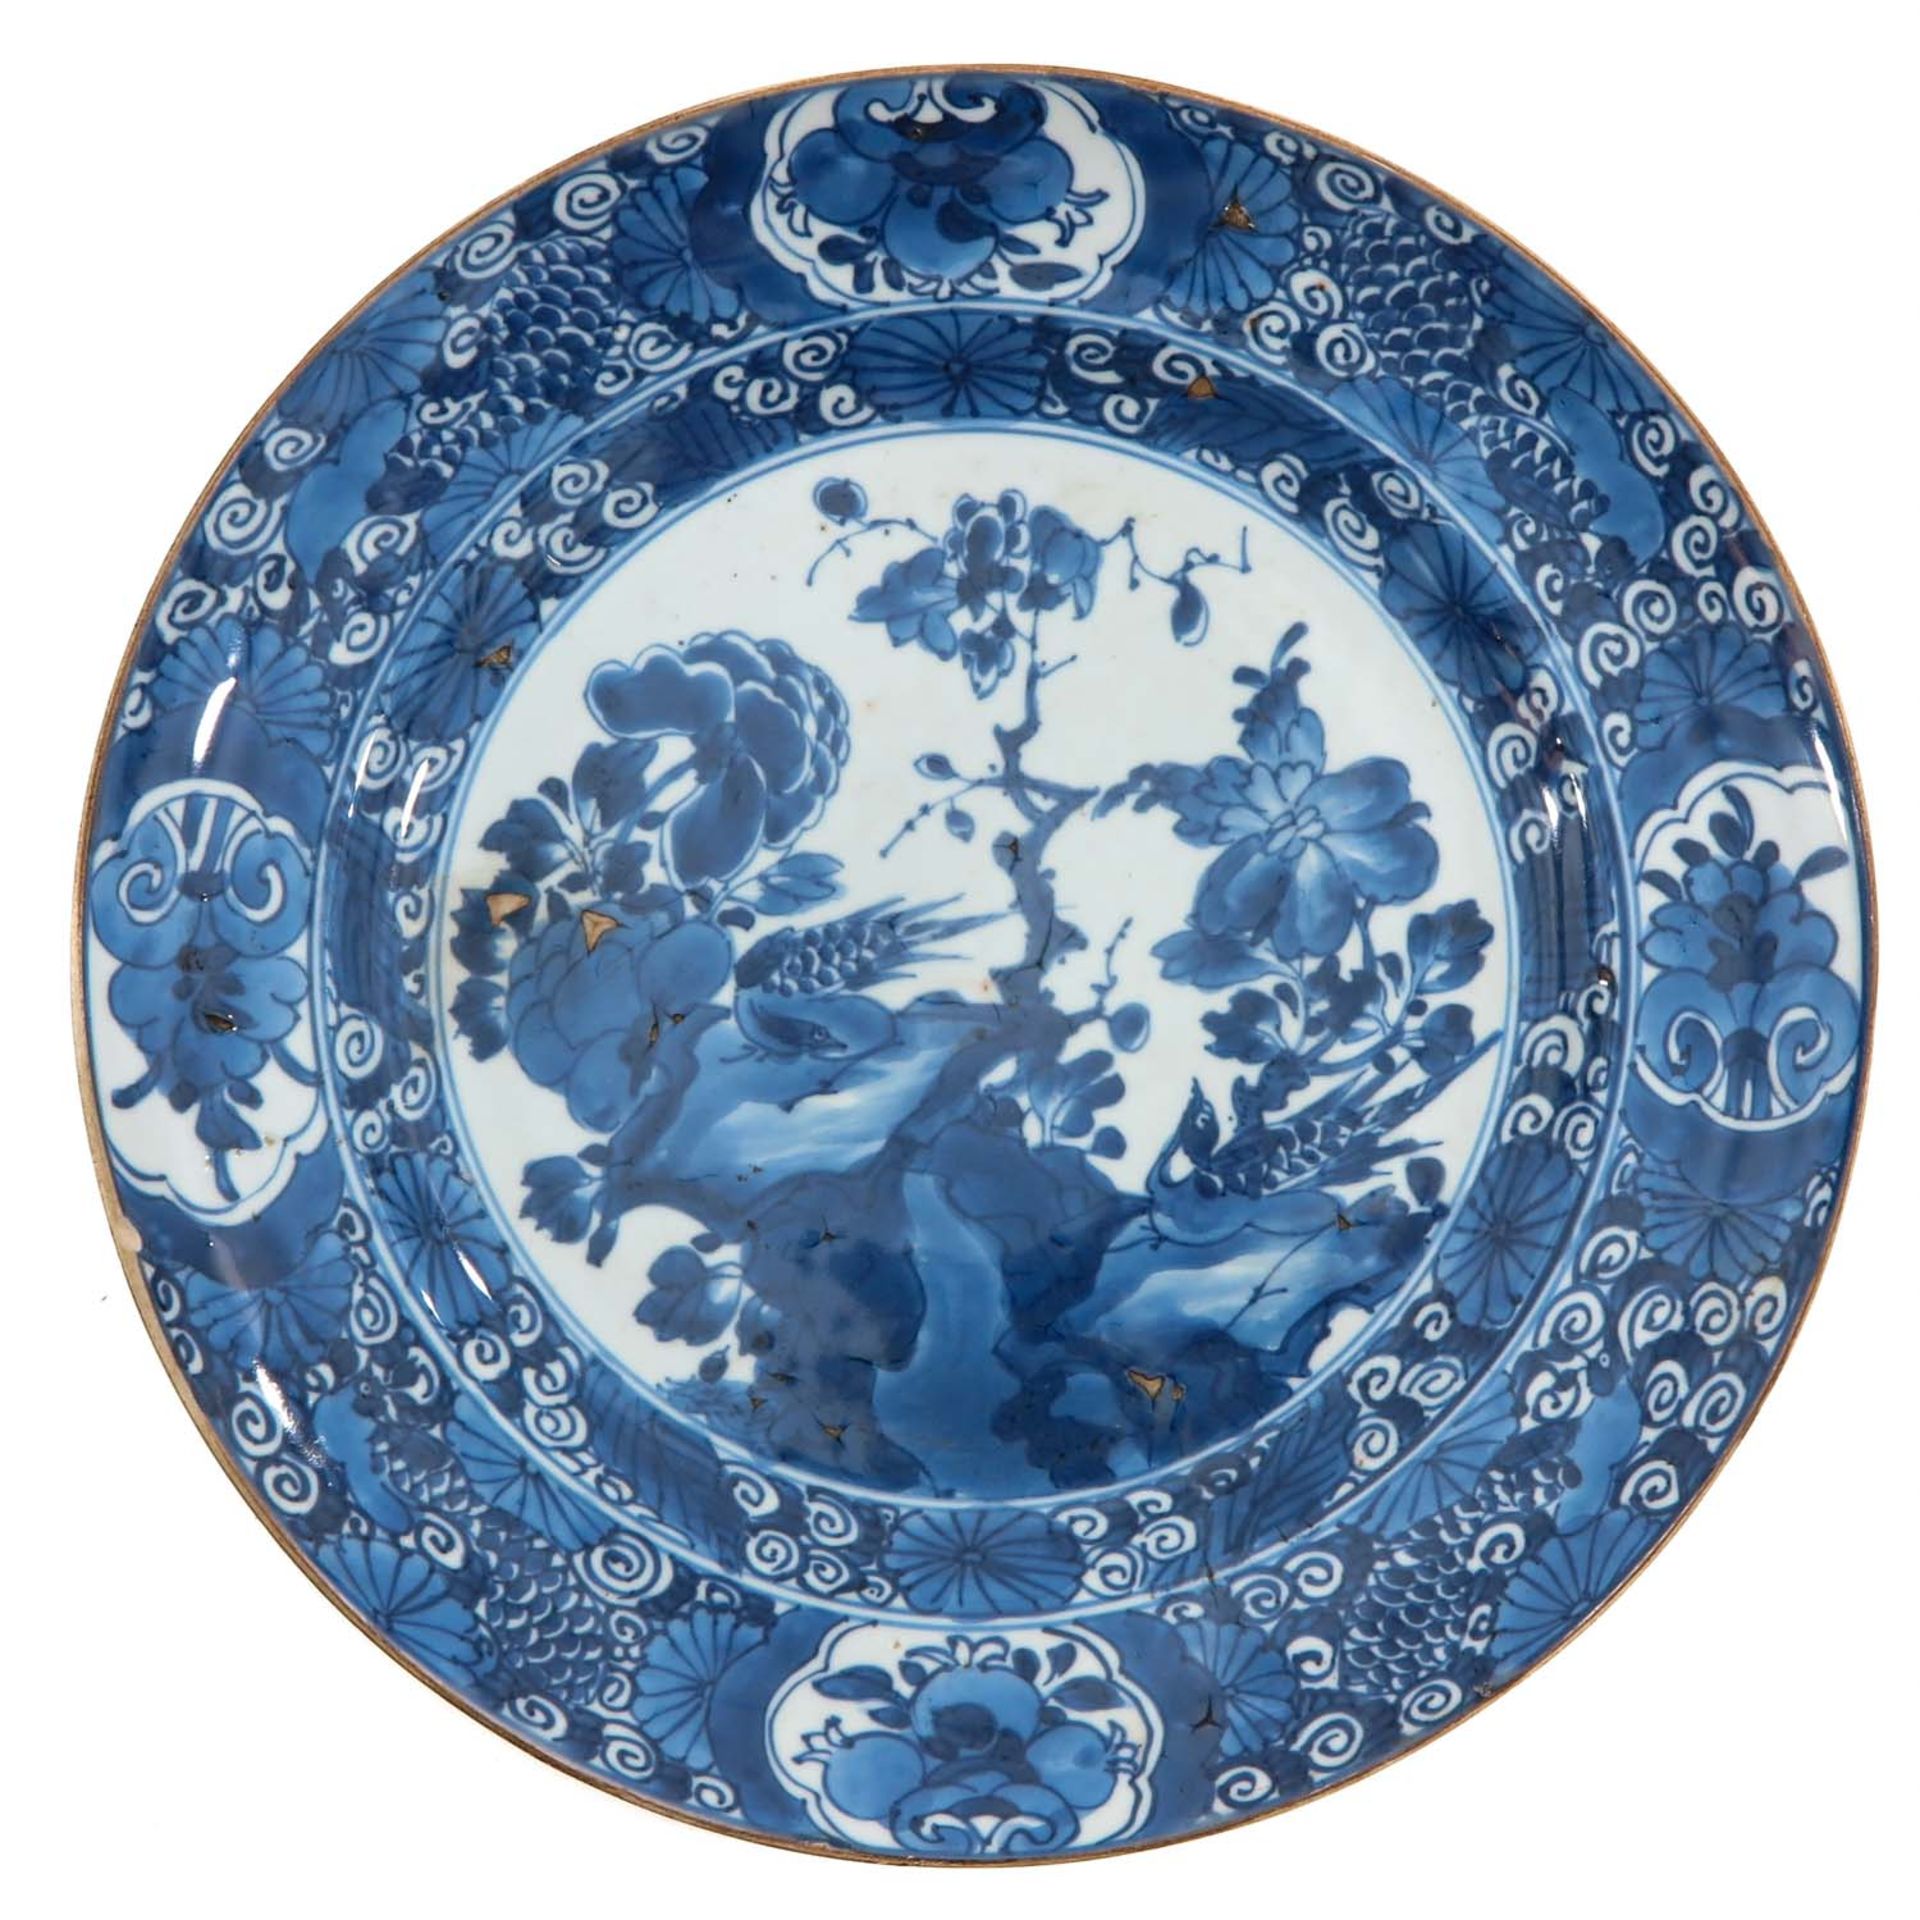 A Blue and White Pheasant Plate